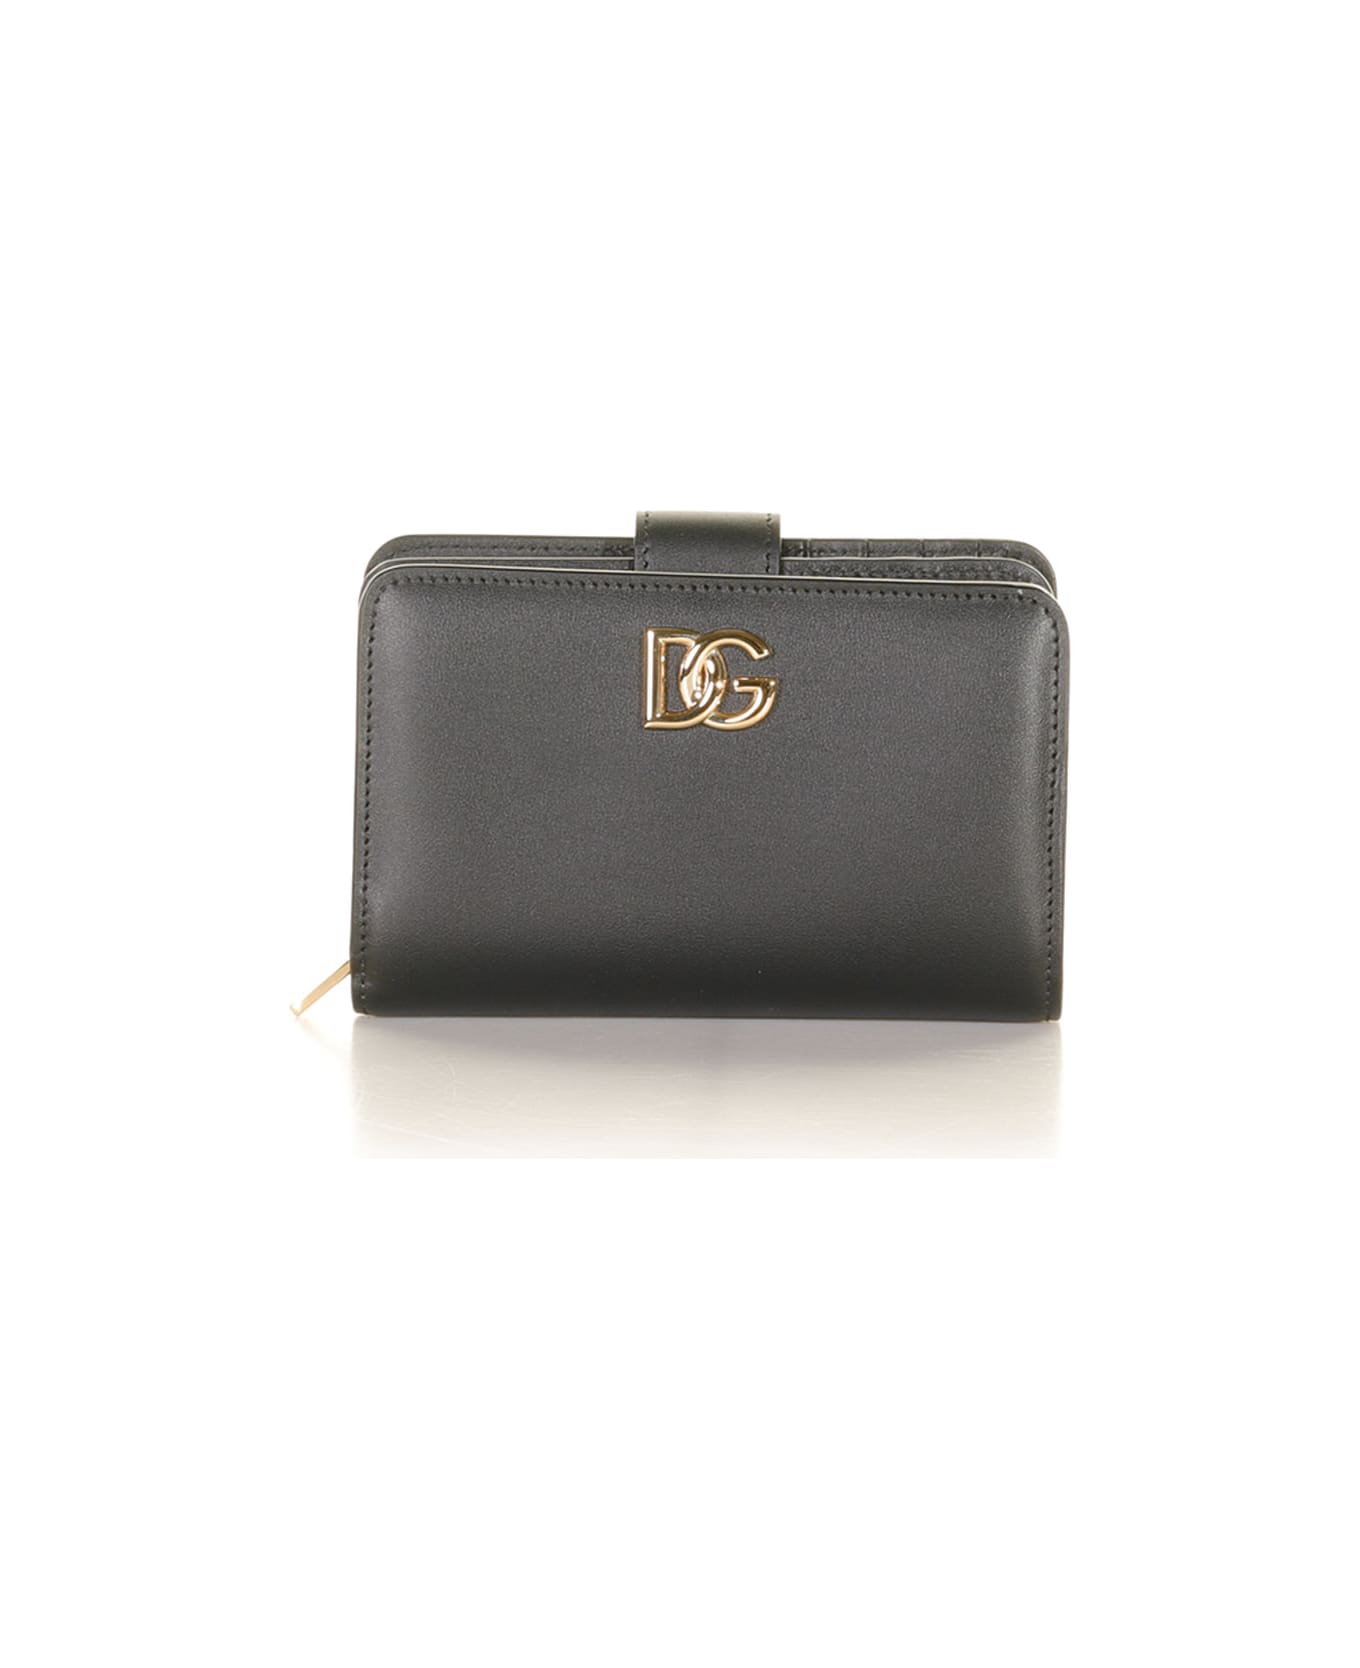 Dolce & Gabbana Bellucci pumps Pink Continental Wallet With Logo - NERO